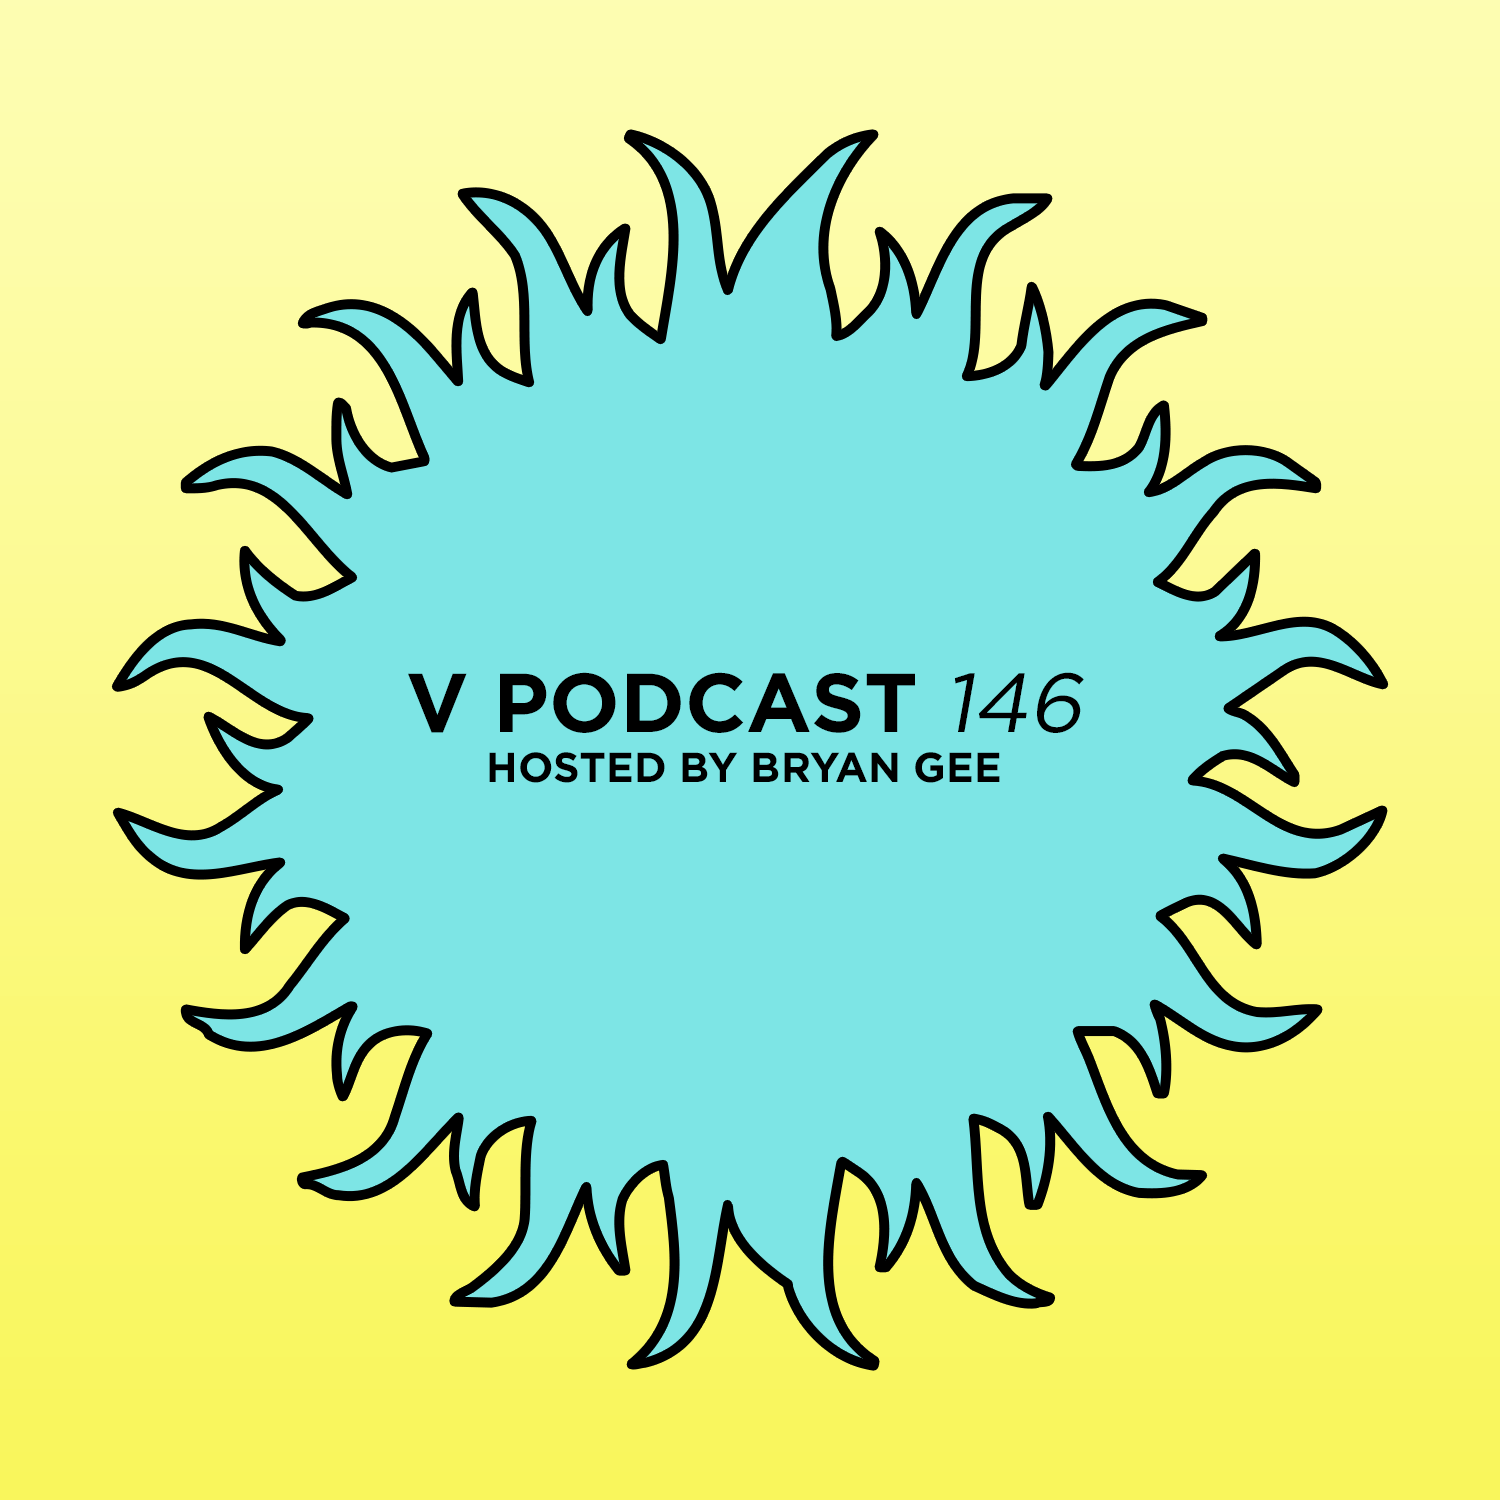 V Podcast 146 - Hosted by Bryan Gee Artwork